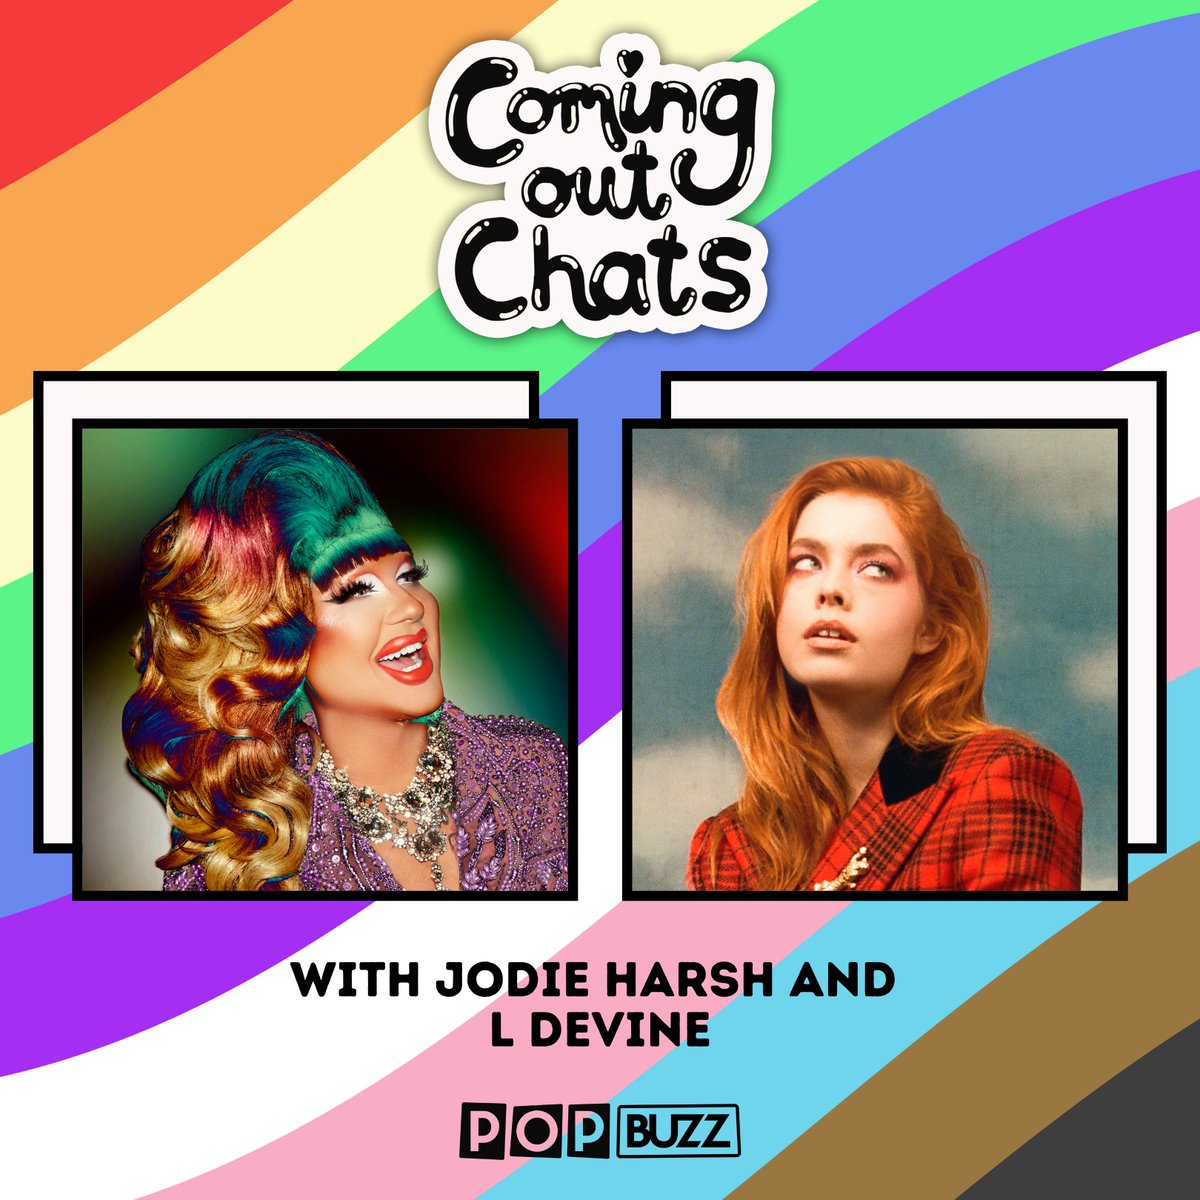 🏳️‍🌈A new episode of ‘Coming Out Chats’ is out now🏳️‍🌈

In this episode @jodieharsh chats with @LDevineMusic about their coming out journeys, sneaking into gay clubs, drag and so much more✨ #ComingOutChats

Listen here➡️ popbuzz.co/3piJi0E